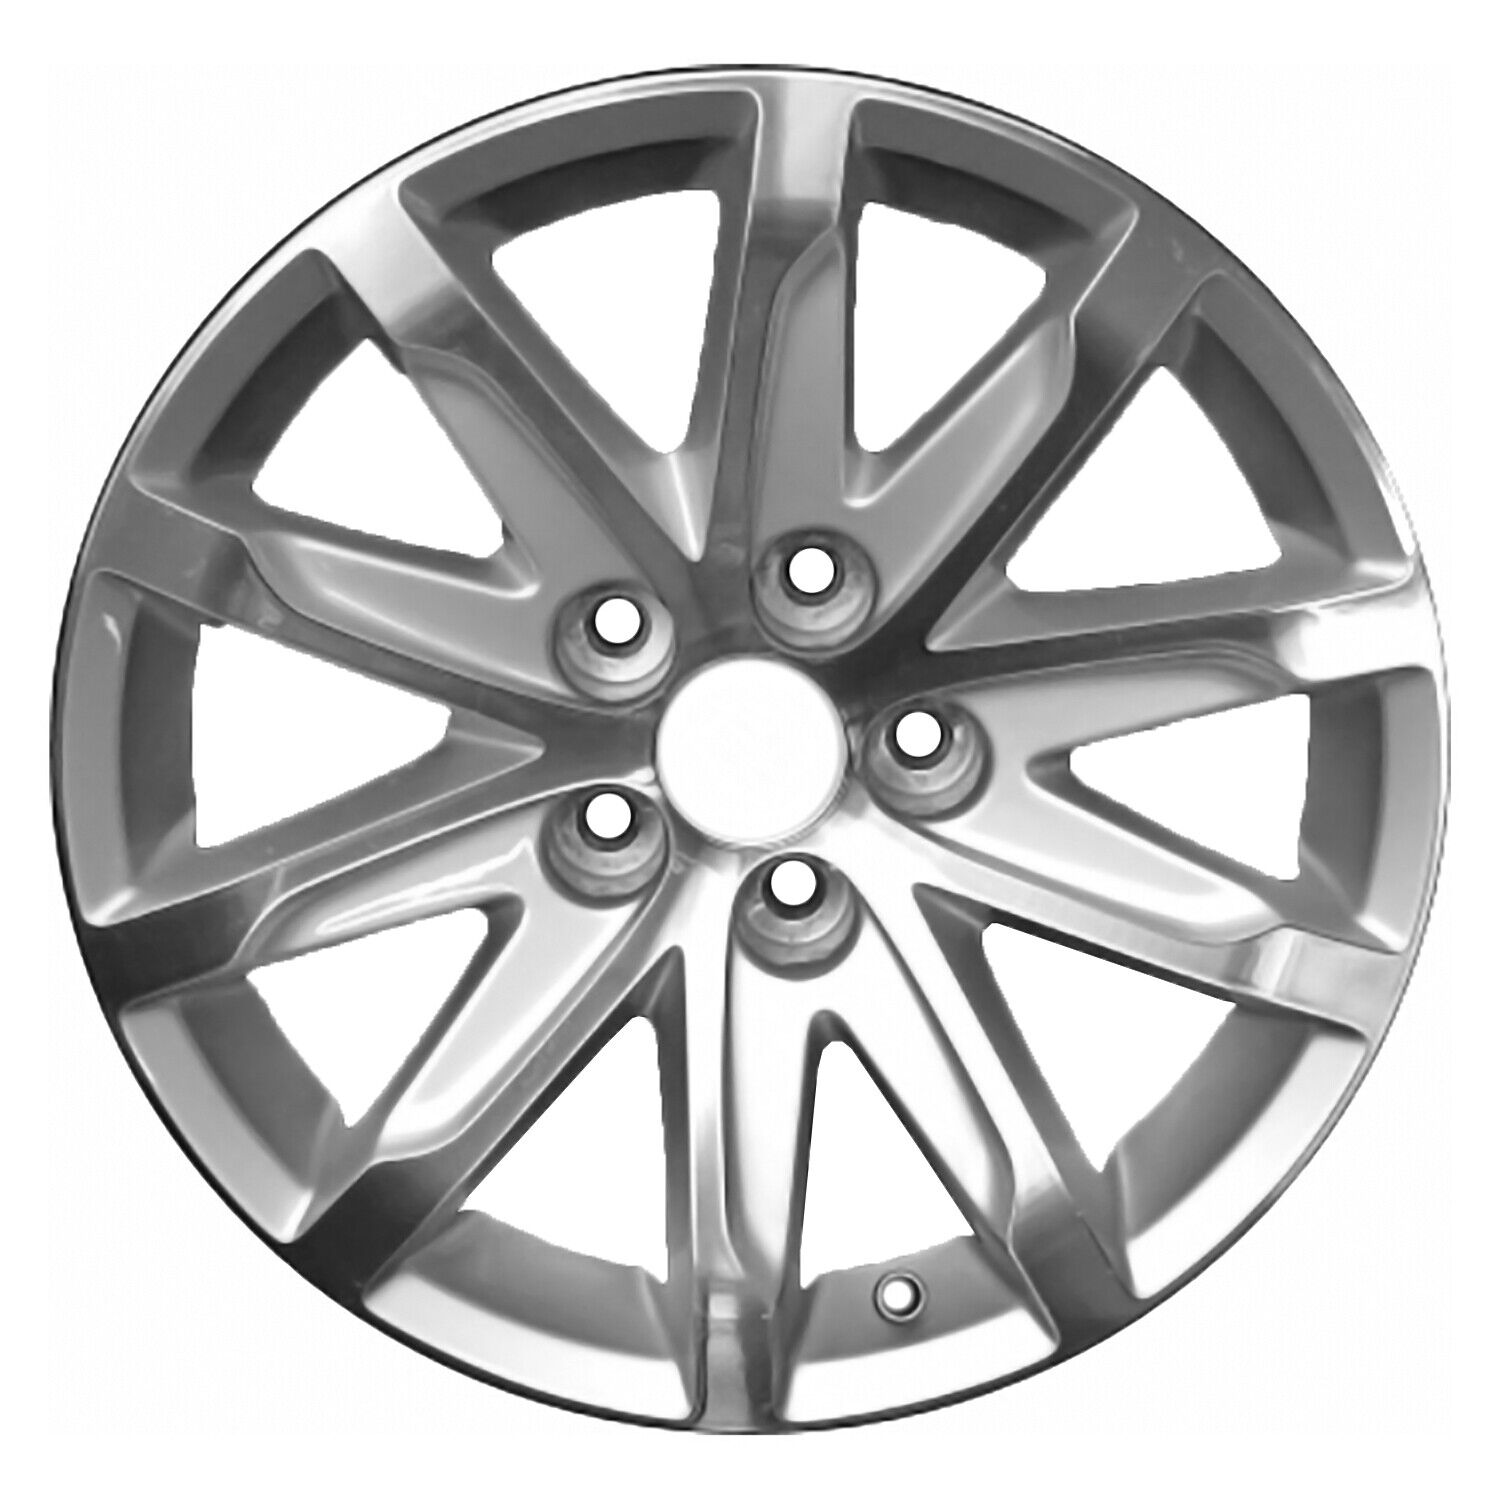 04713 Reconditioned OEM Aluminum Wheel 17x8.5 fits 2014-2016 Cadillac CTS